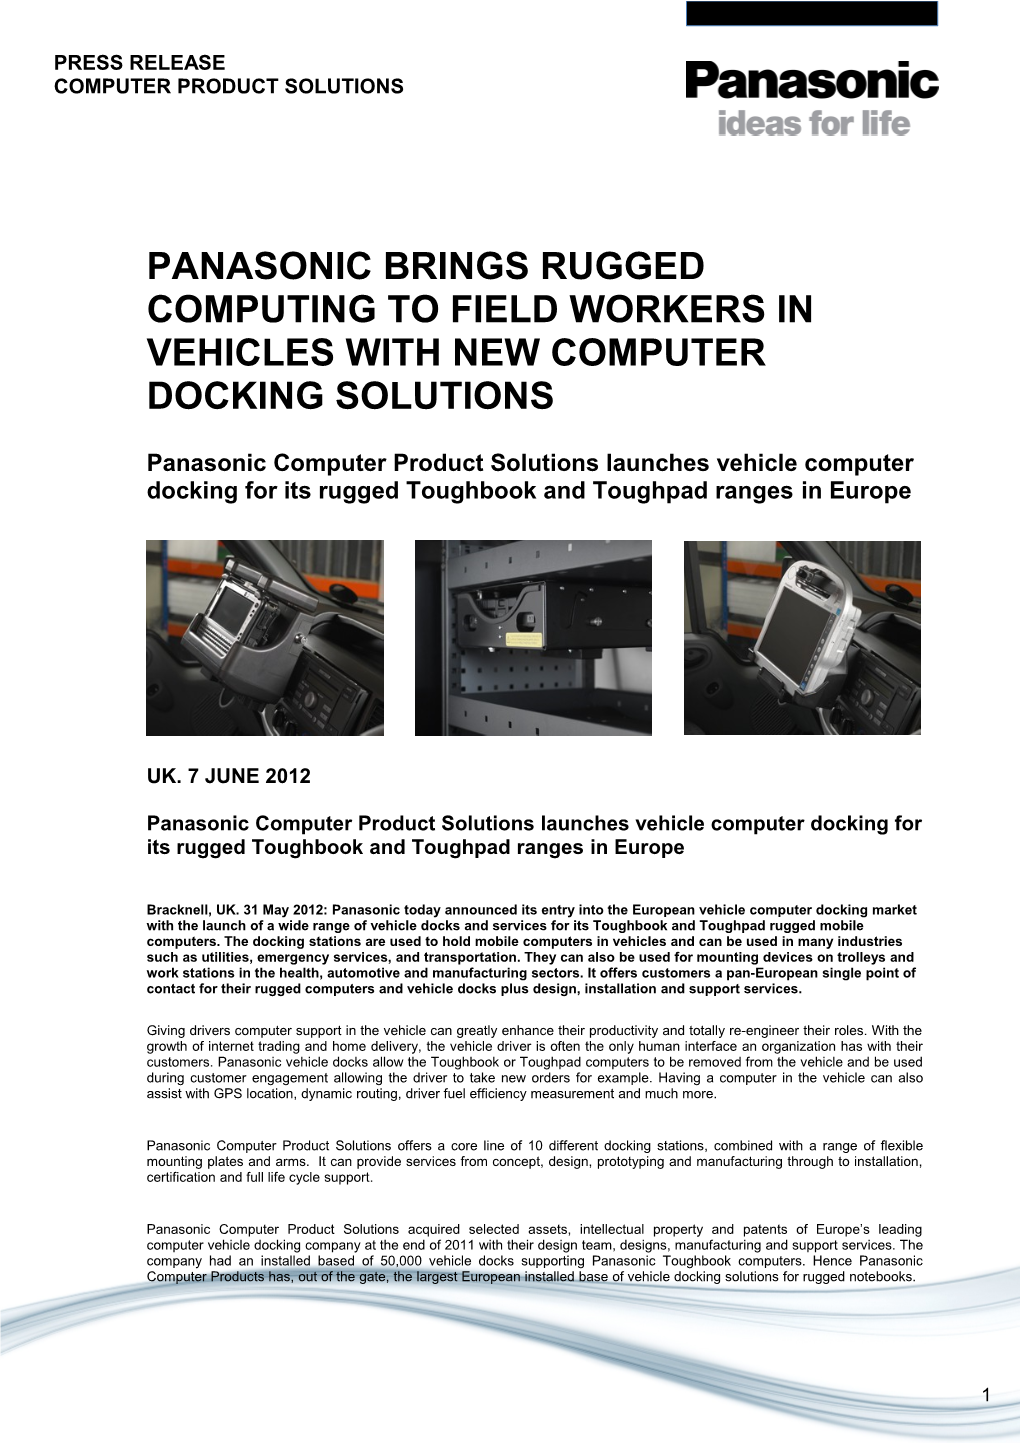 Panasonic Computer Product Solutions Launches Vehicle Computer Docking for Its Rugged